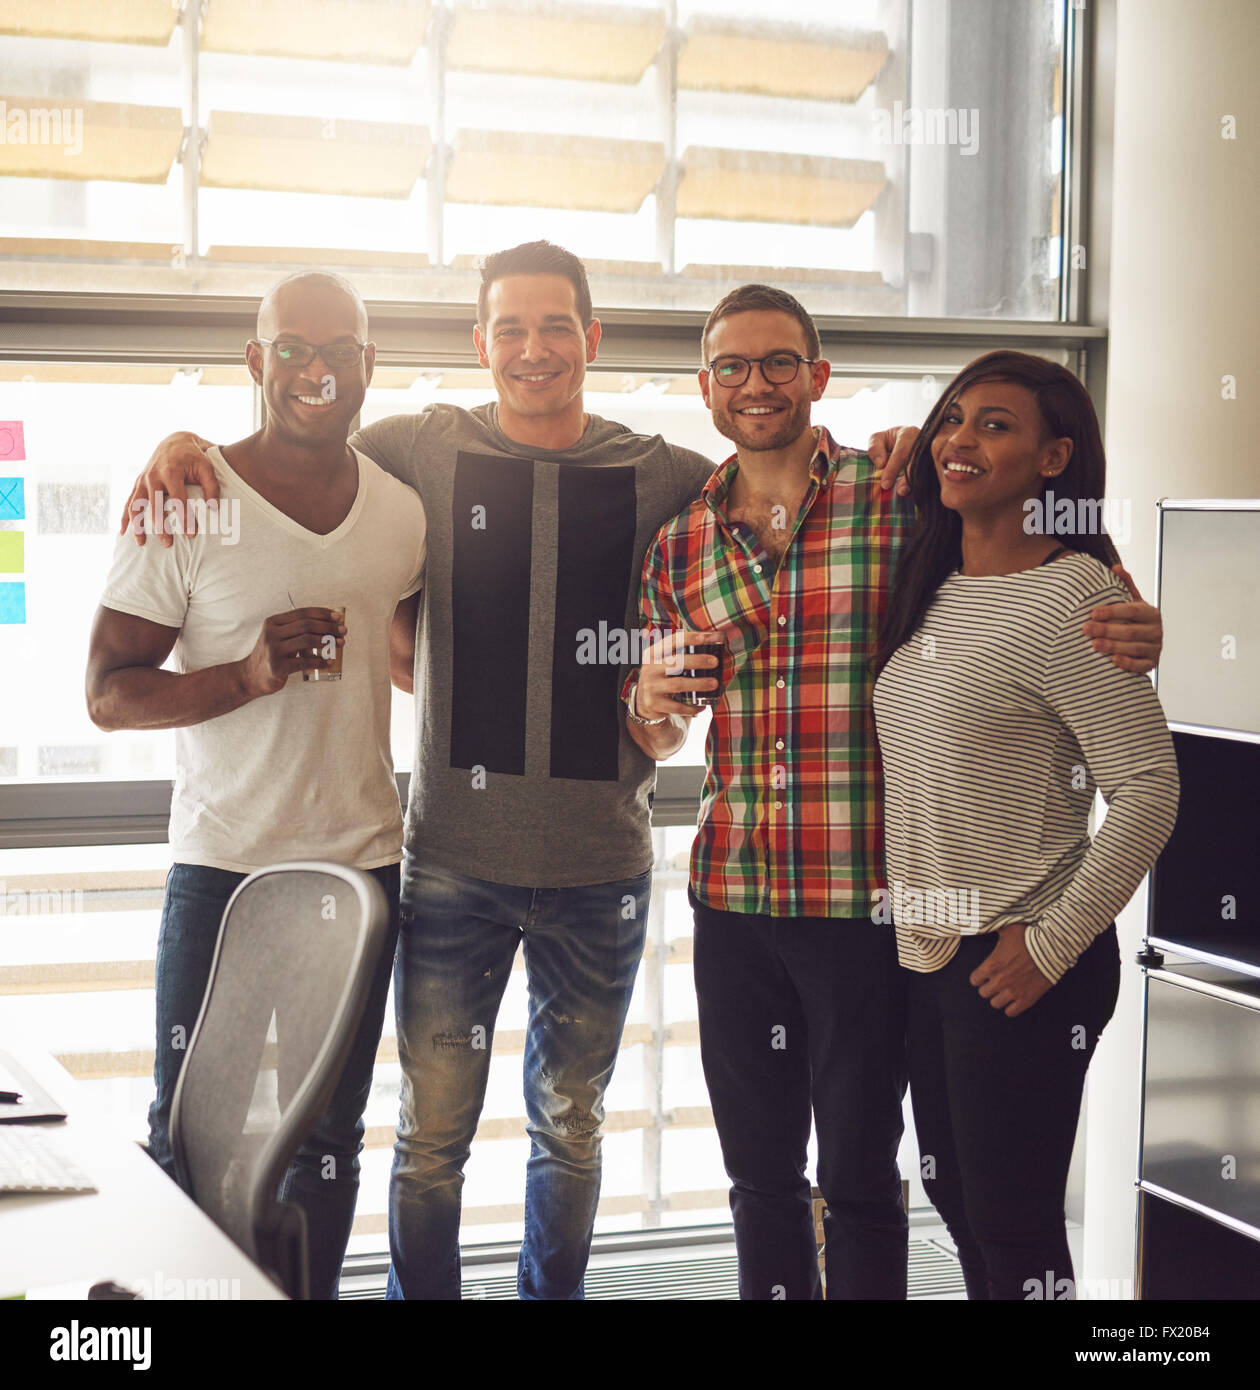 Group of four diverse friends dressed in casual clothing and holding drinks while standing close to each other in office with la Stock Photo